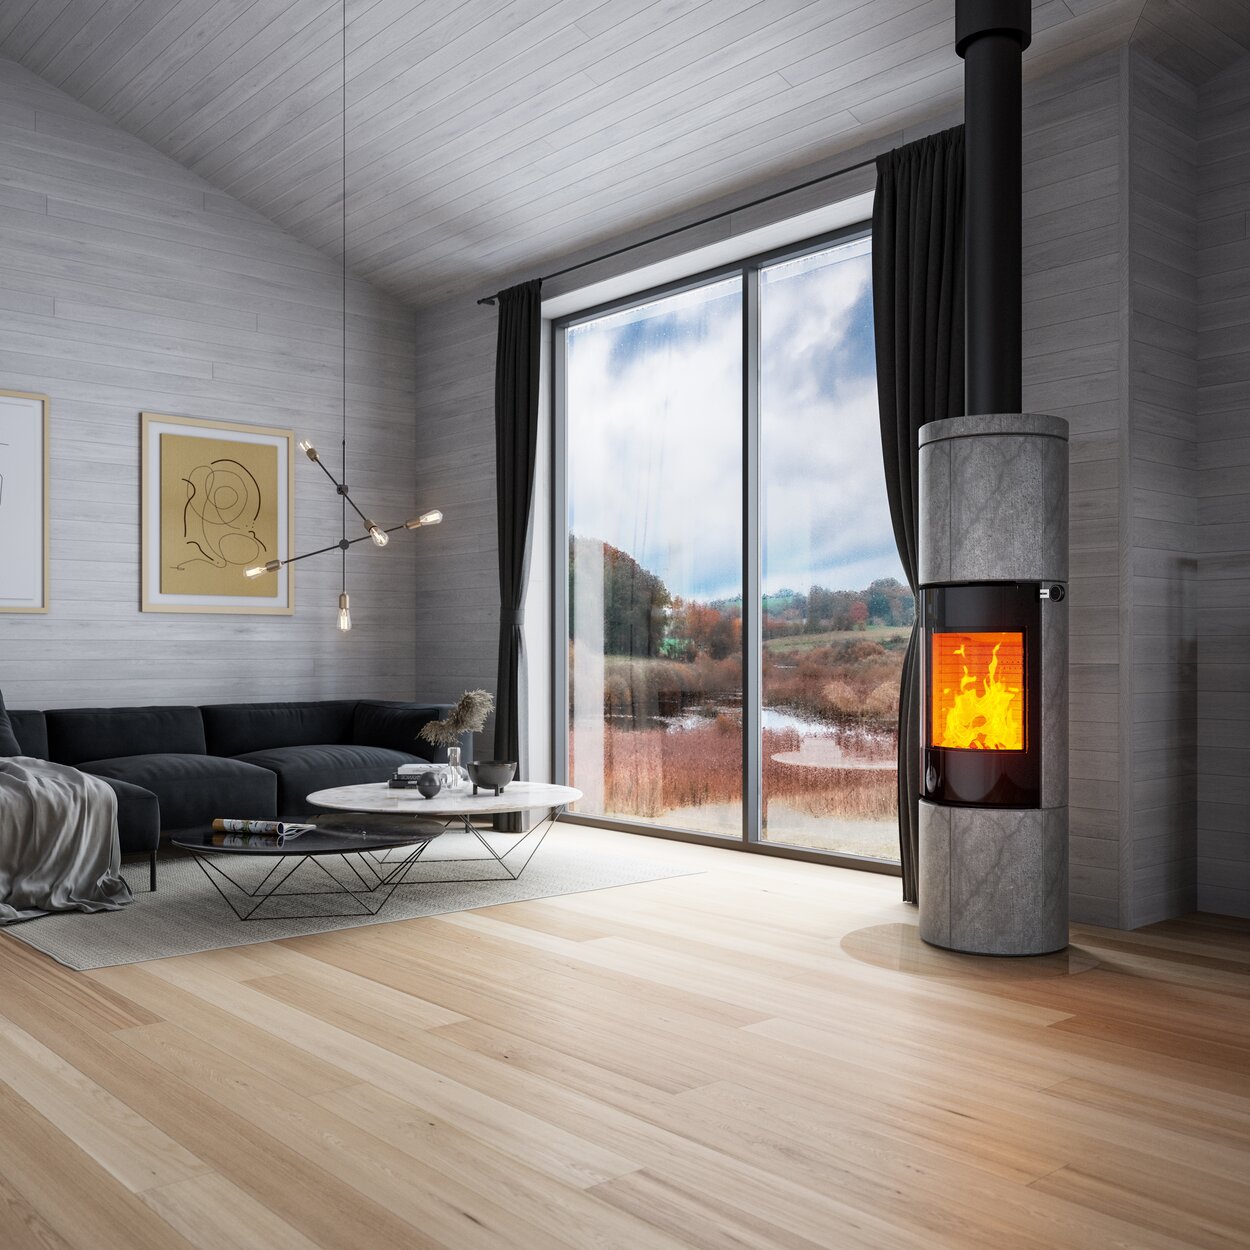 Wood stove JUNO 166 L with soapstone cladding and glass door in a large living room in grey tones